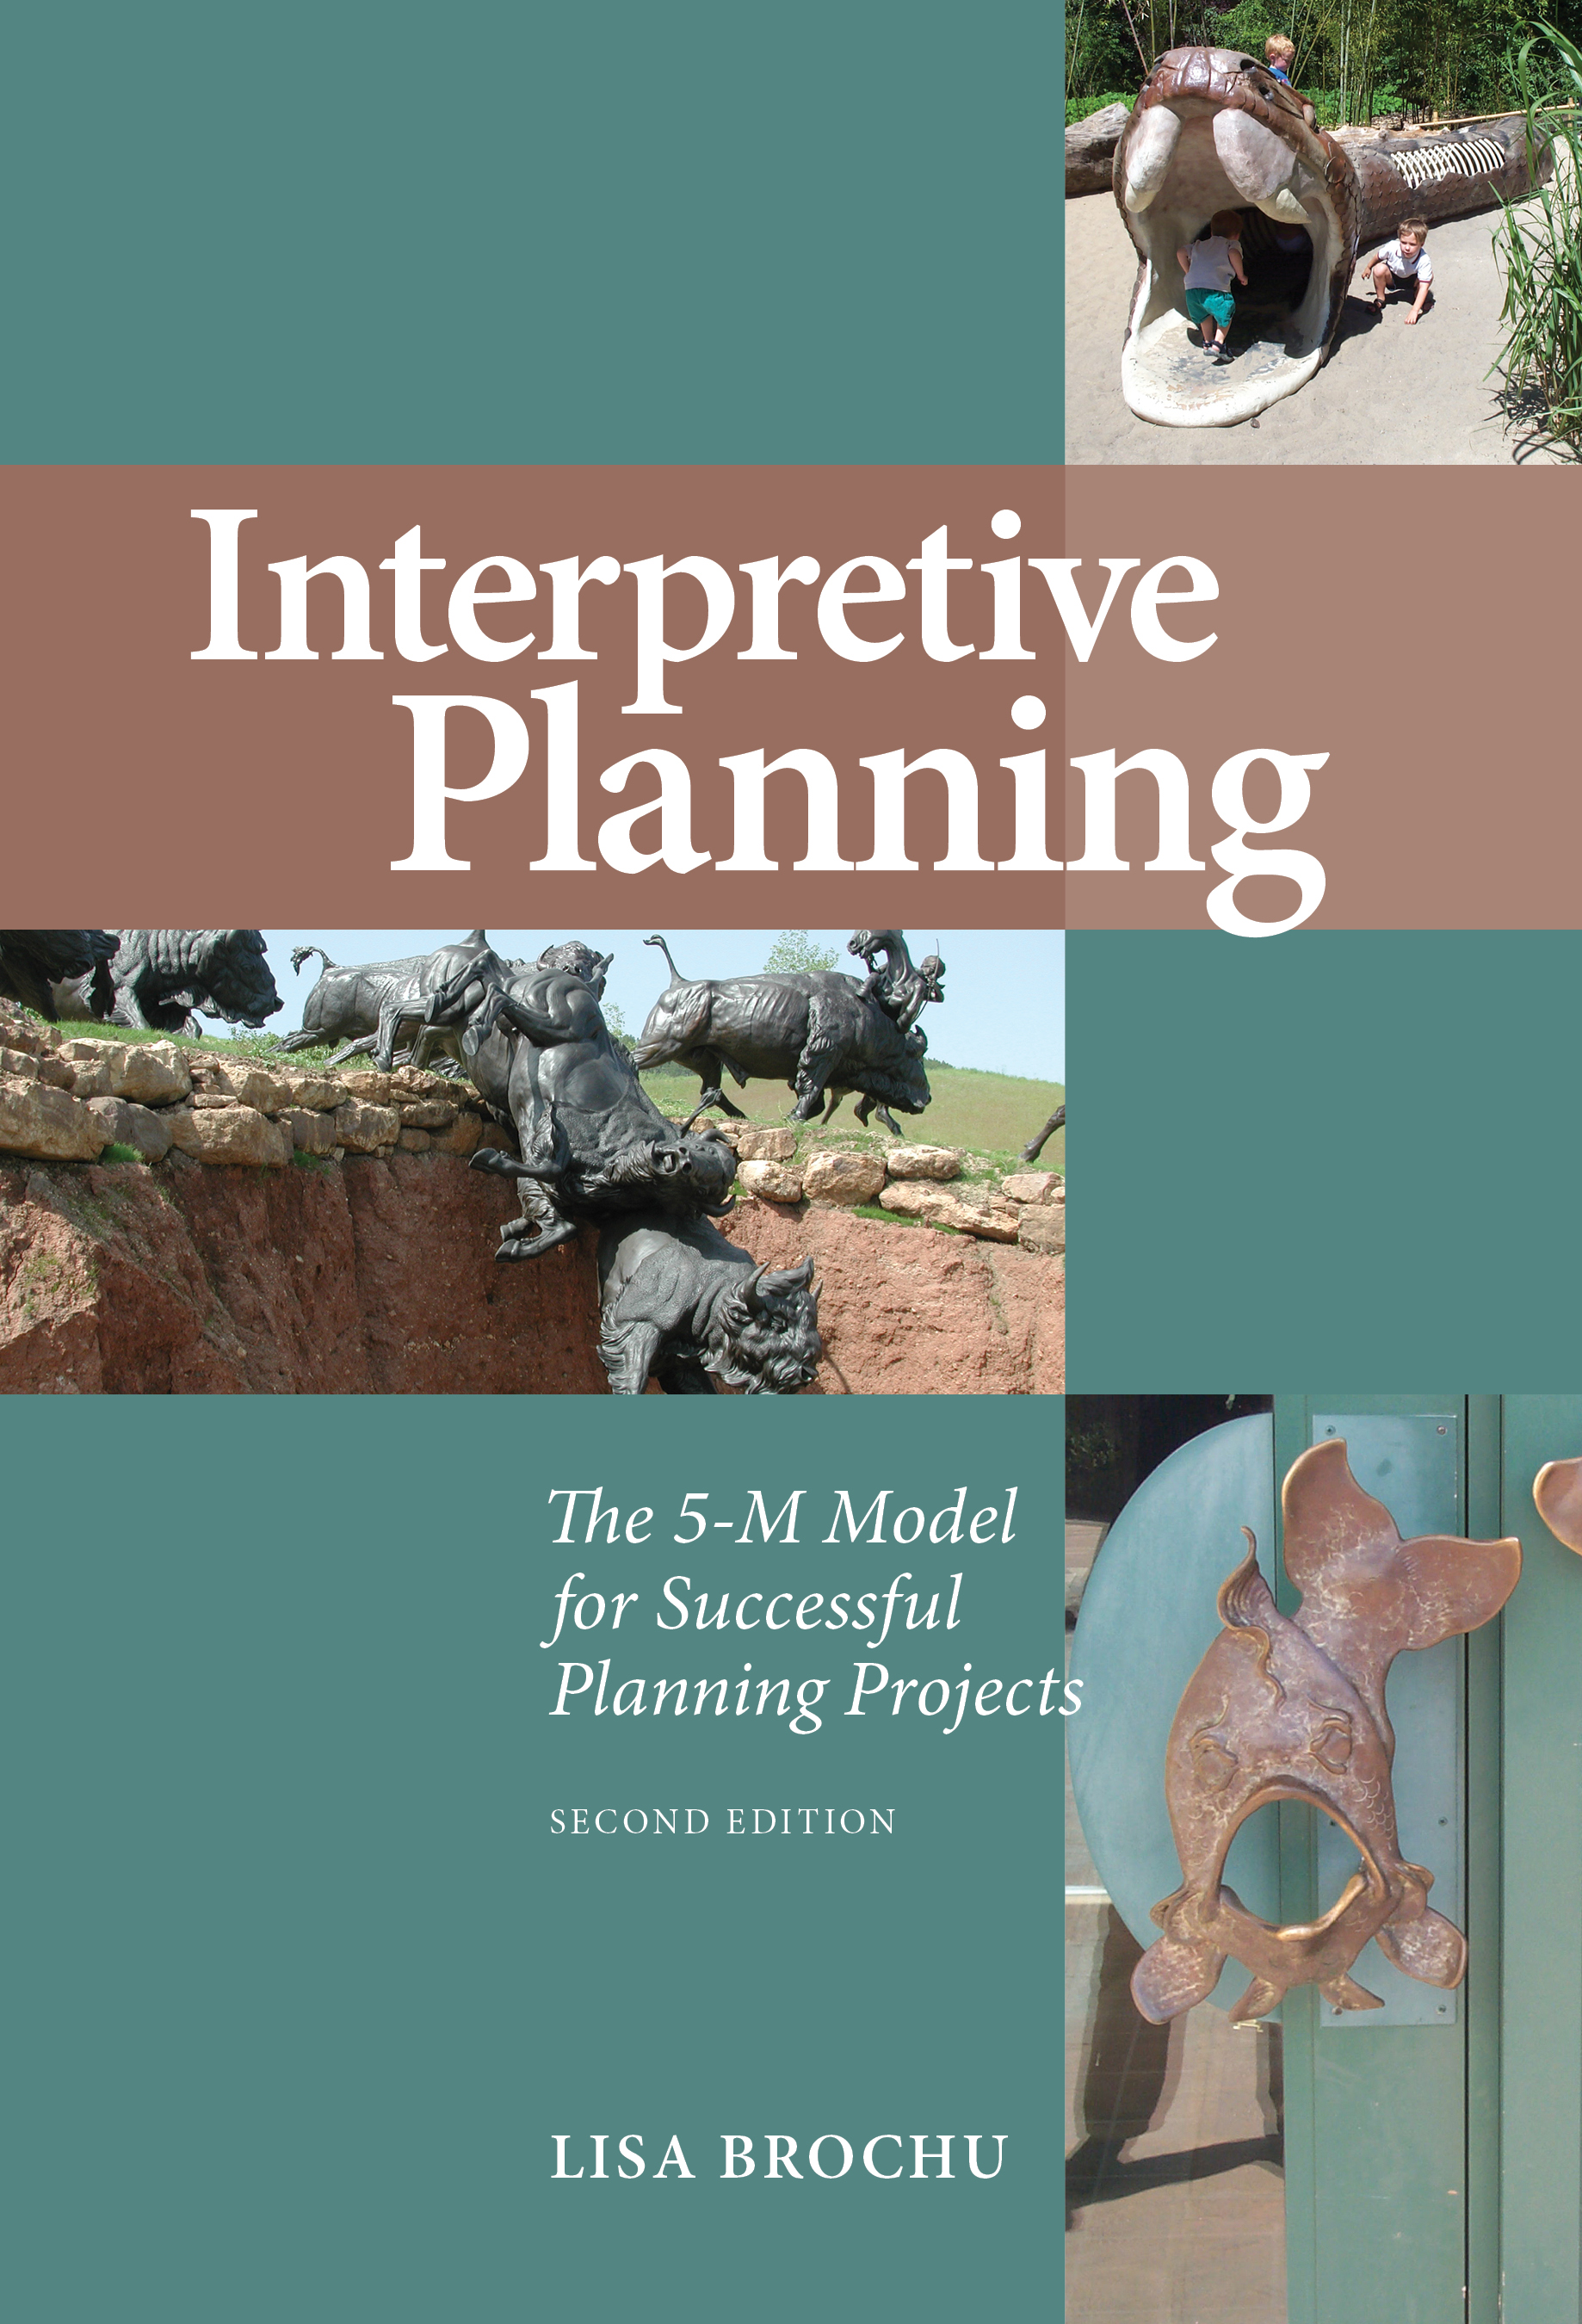 Interpretive Planning: The 5-M Model for Successful Planning Projects